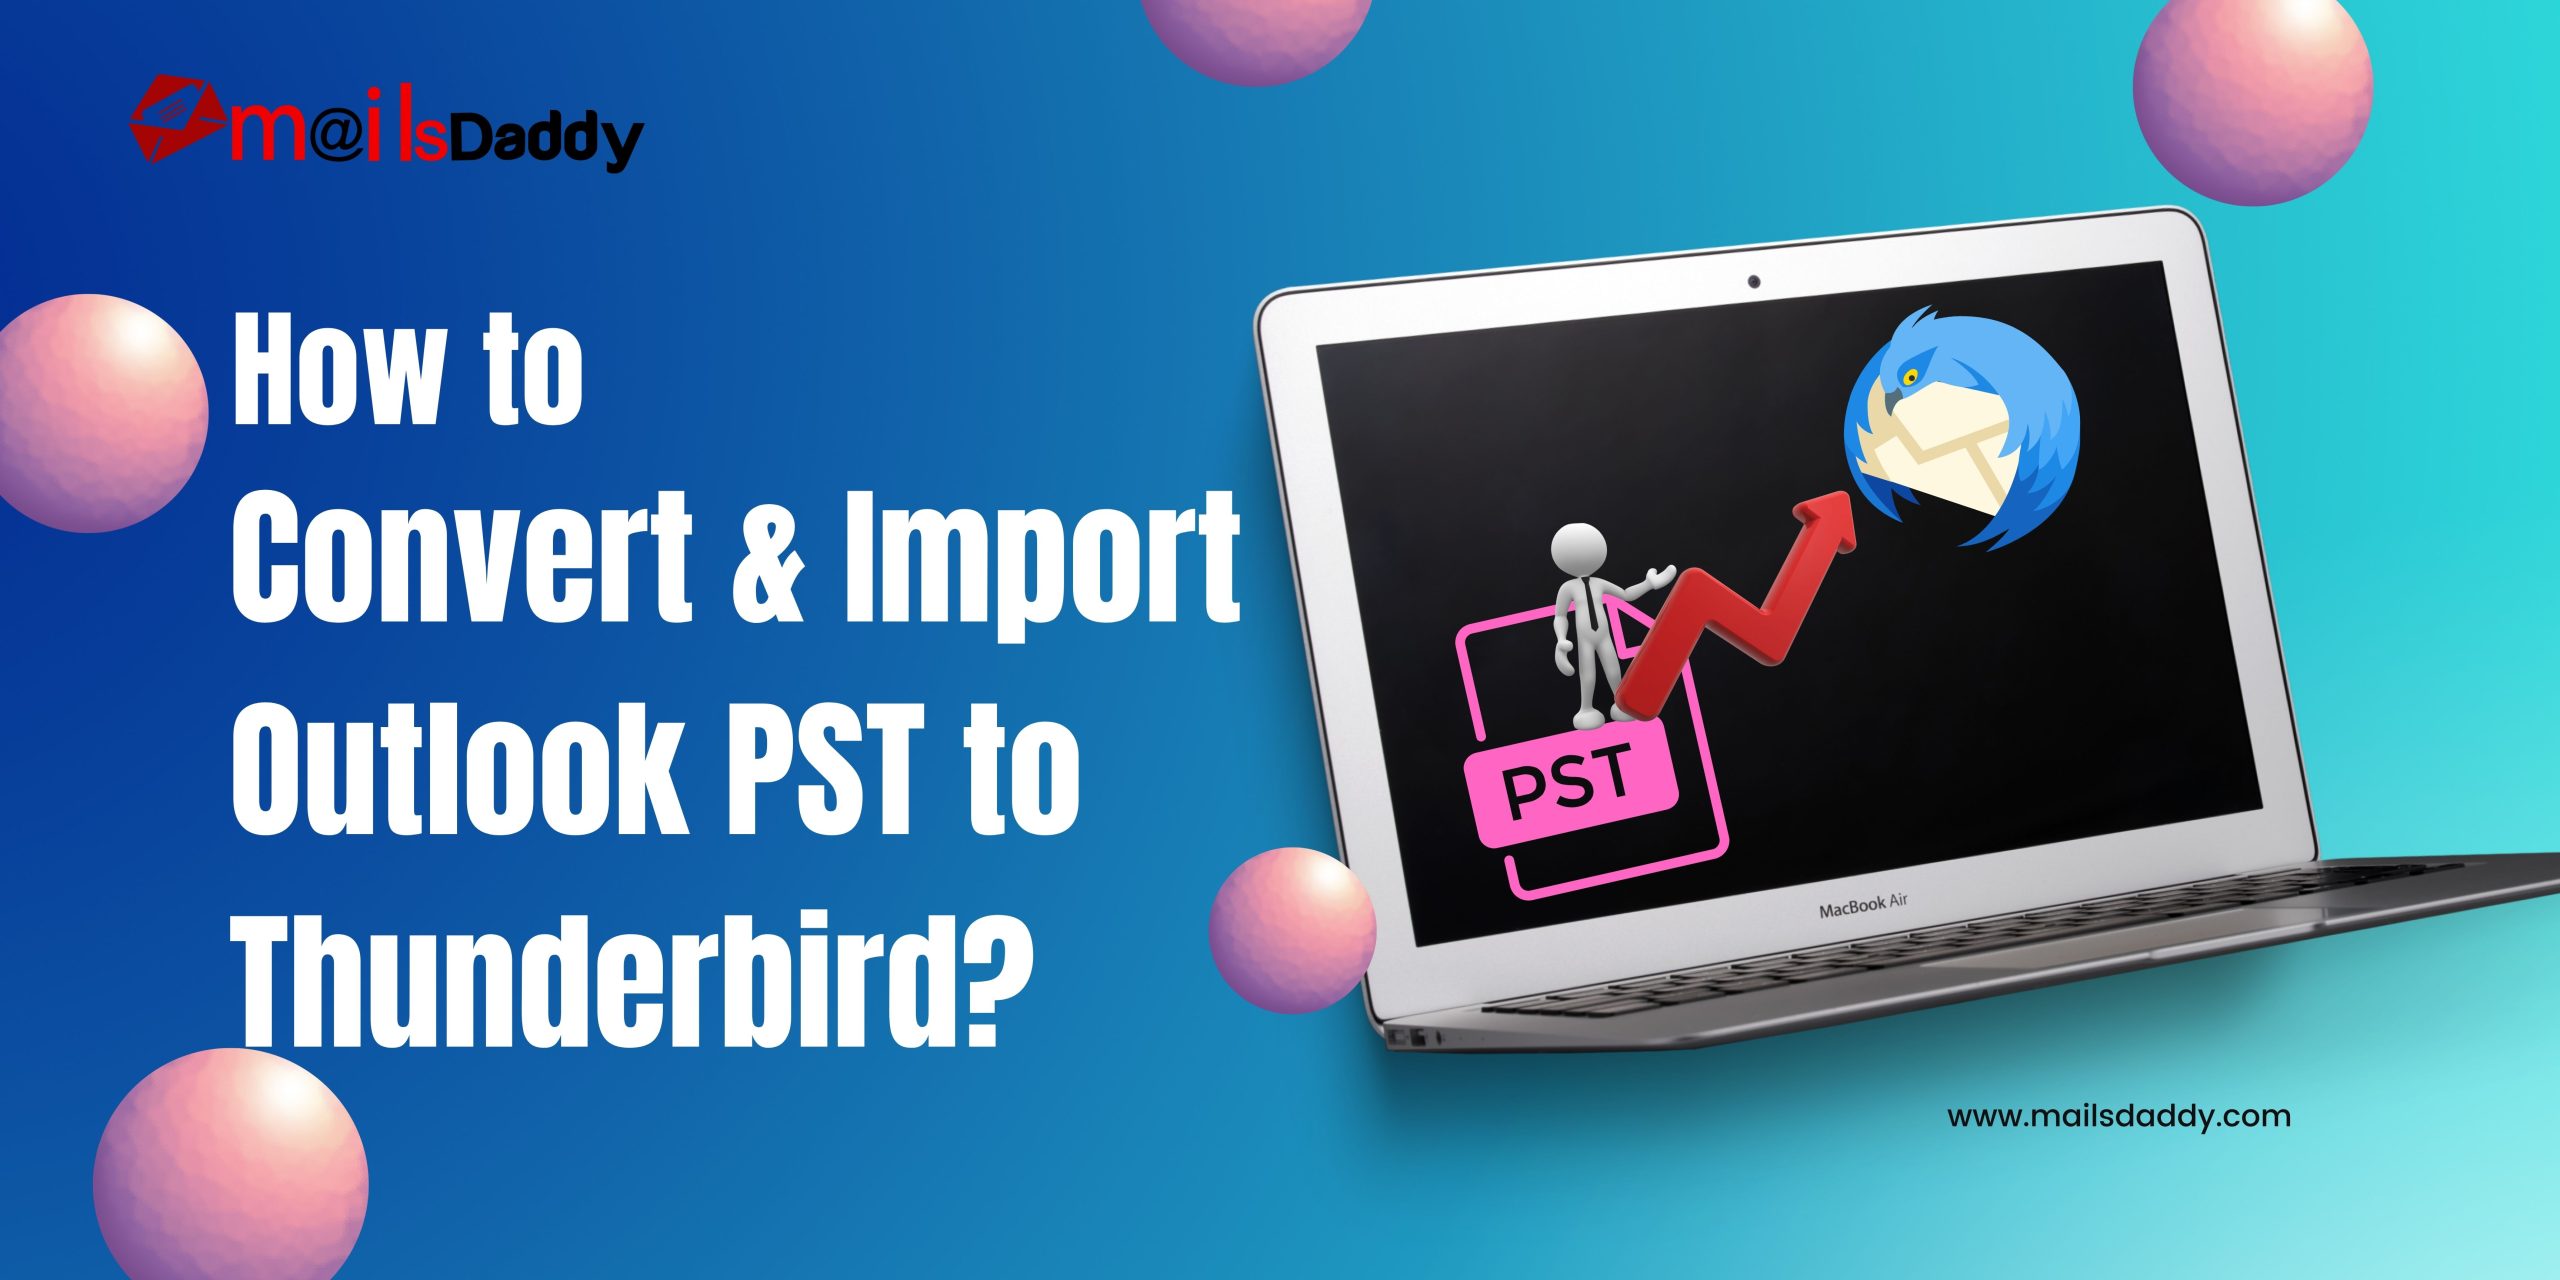 How to Convert & Import Outlook PST to Thunderbird?